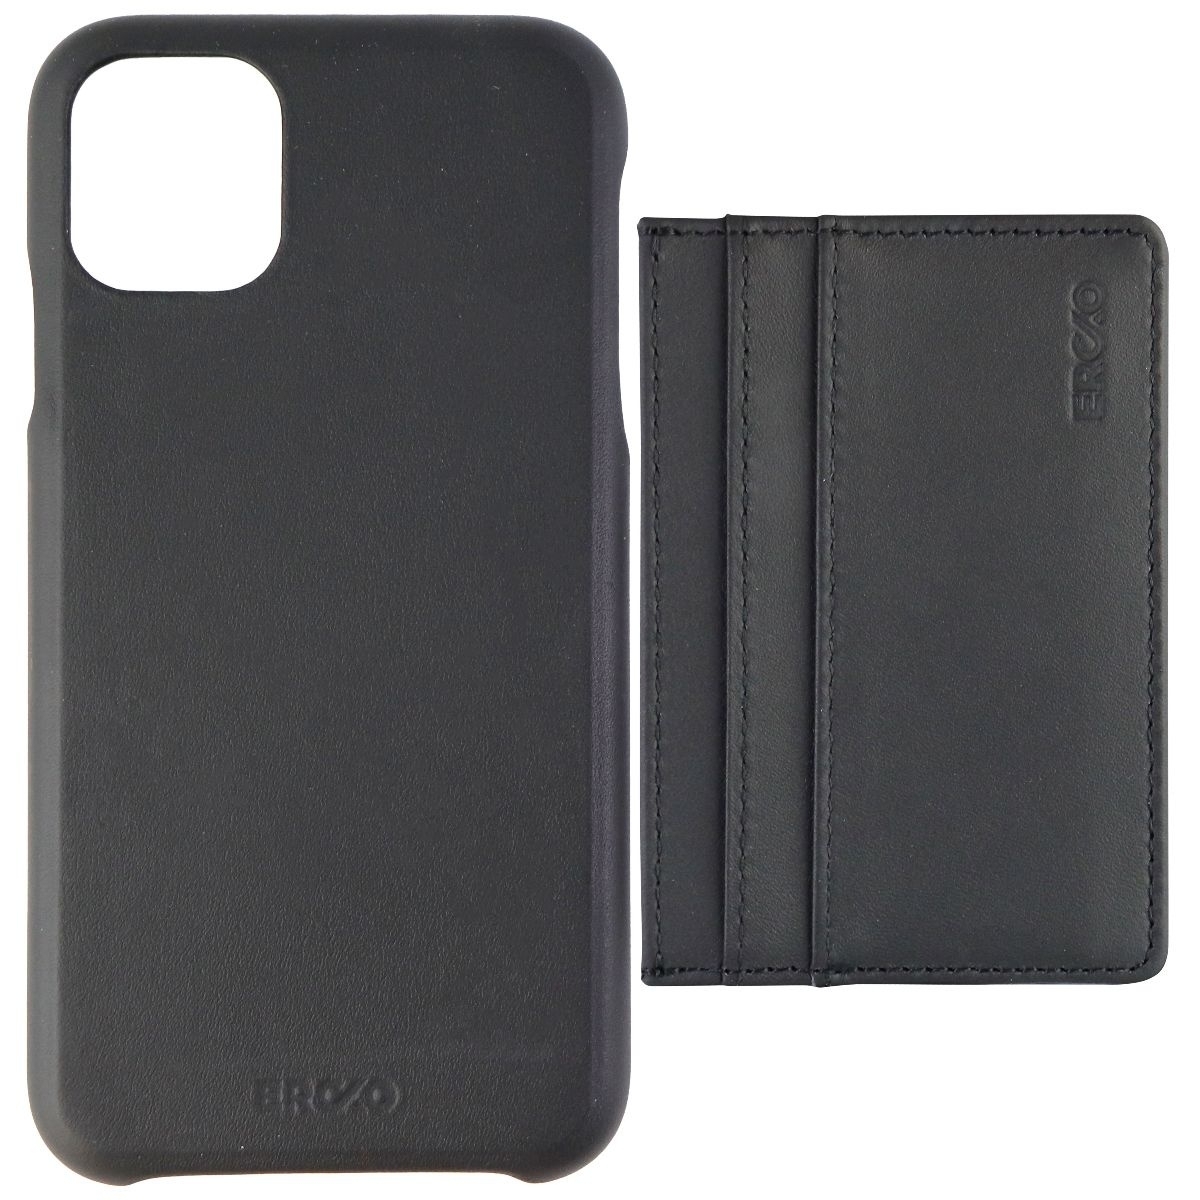 Ercko 2-in-1 Slim Leather Magnet Case And Wallet For Apple IPhone 11 - Black